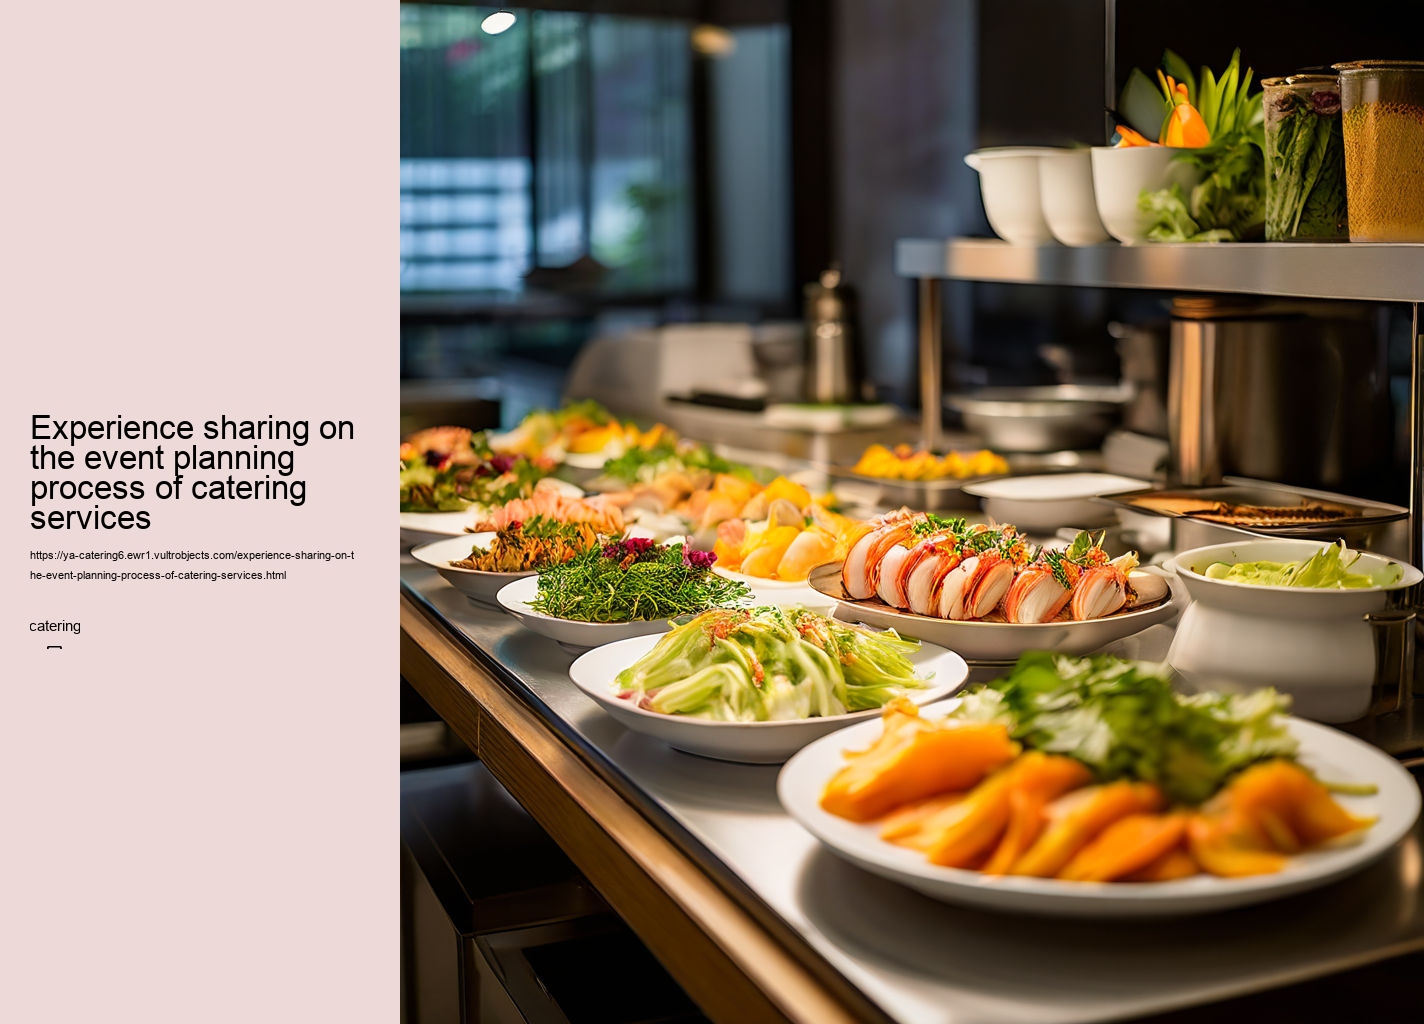 Experience sharing on the event planning process of catering services